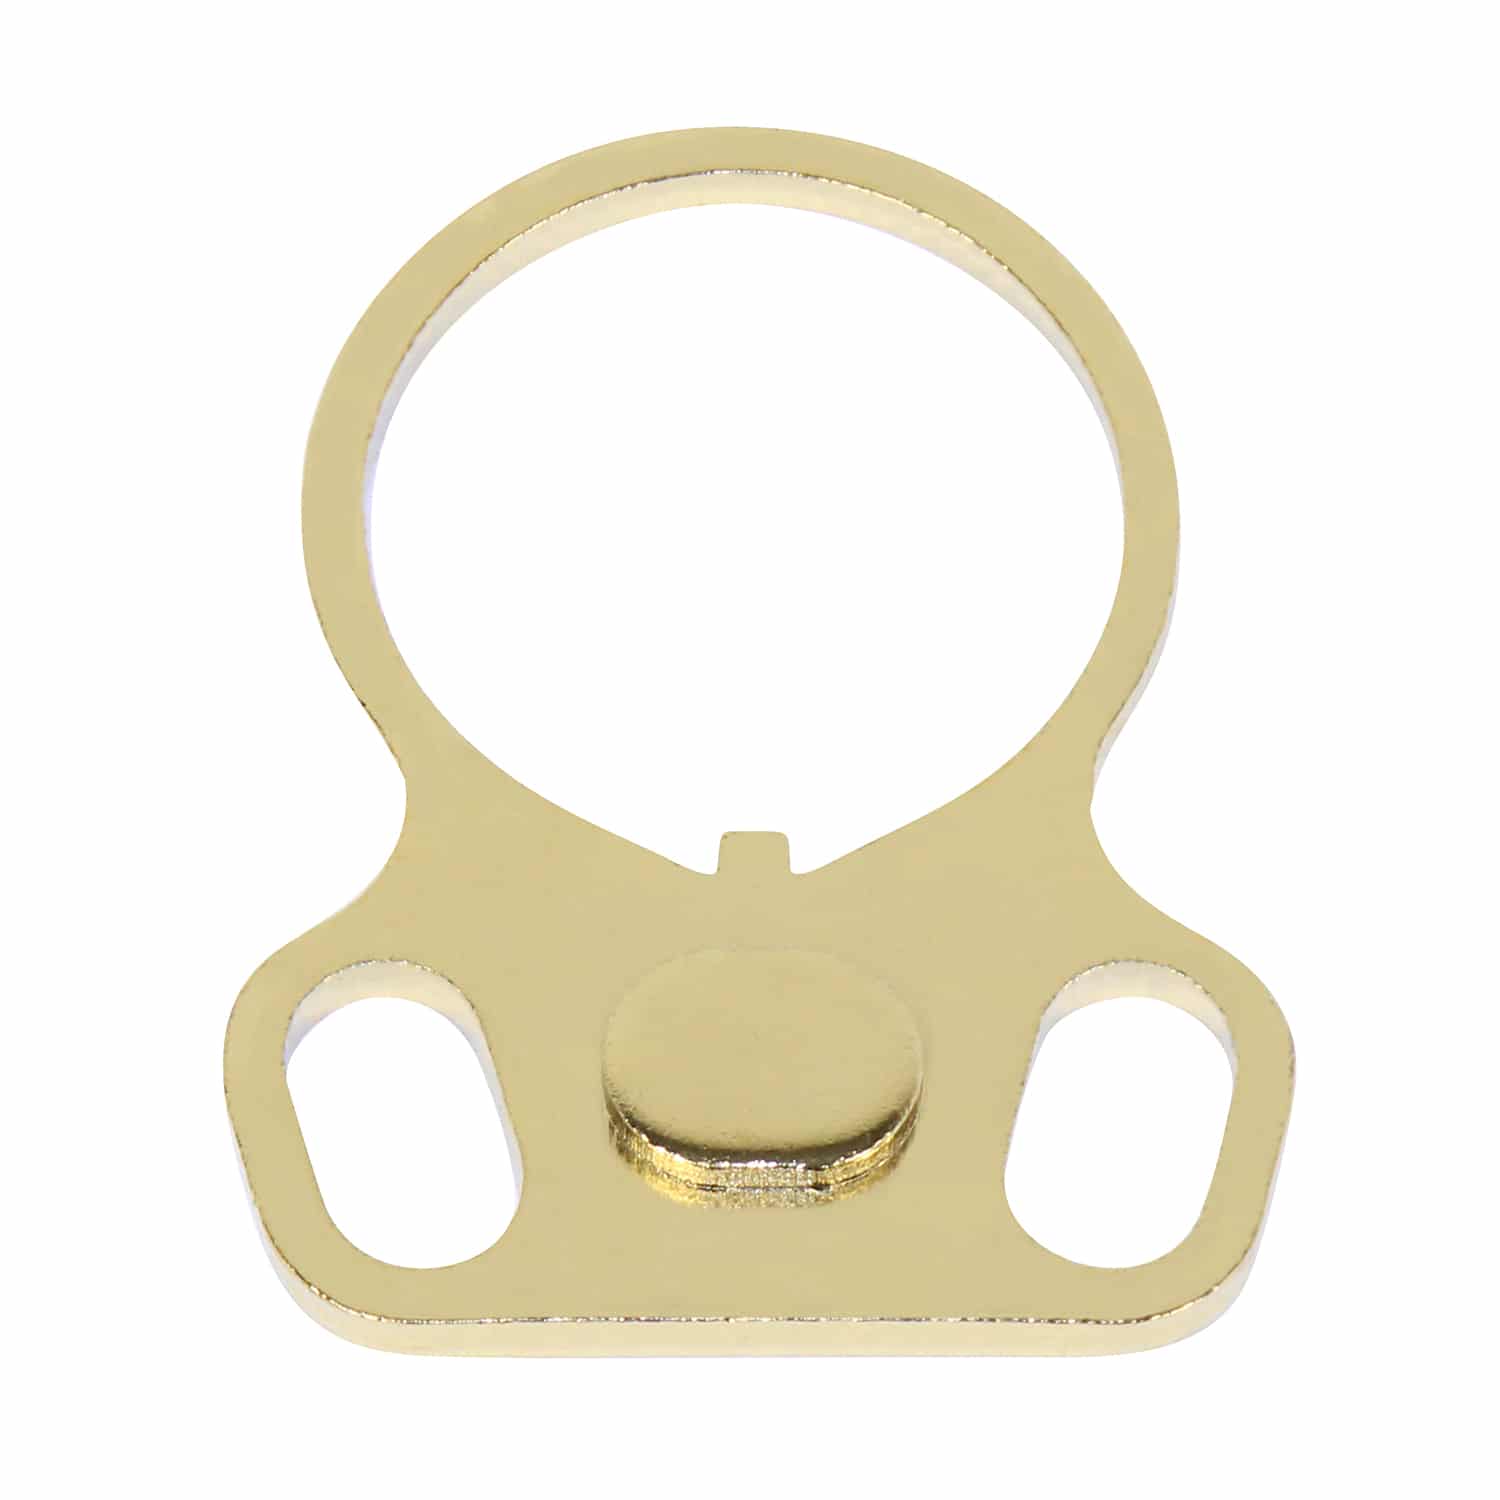 AR-15 Ambi Single Point Sling Adapter (Gold Plated)